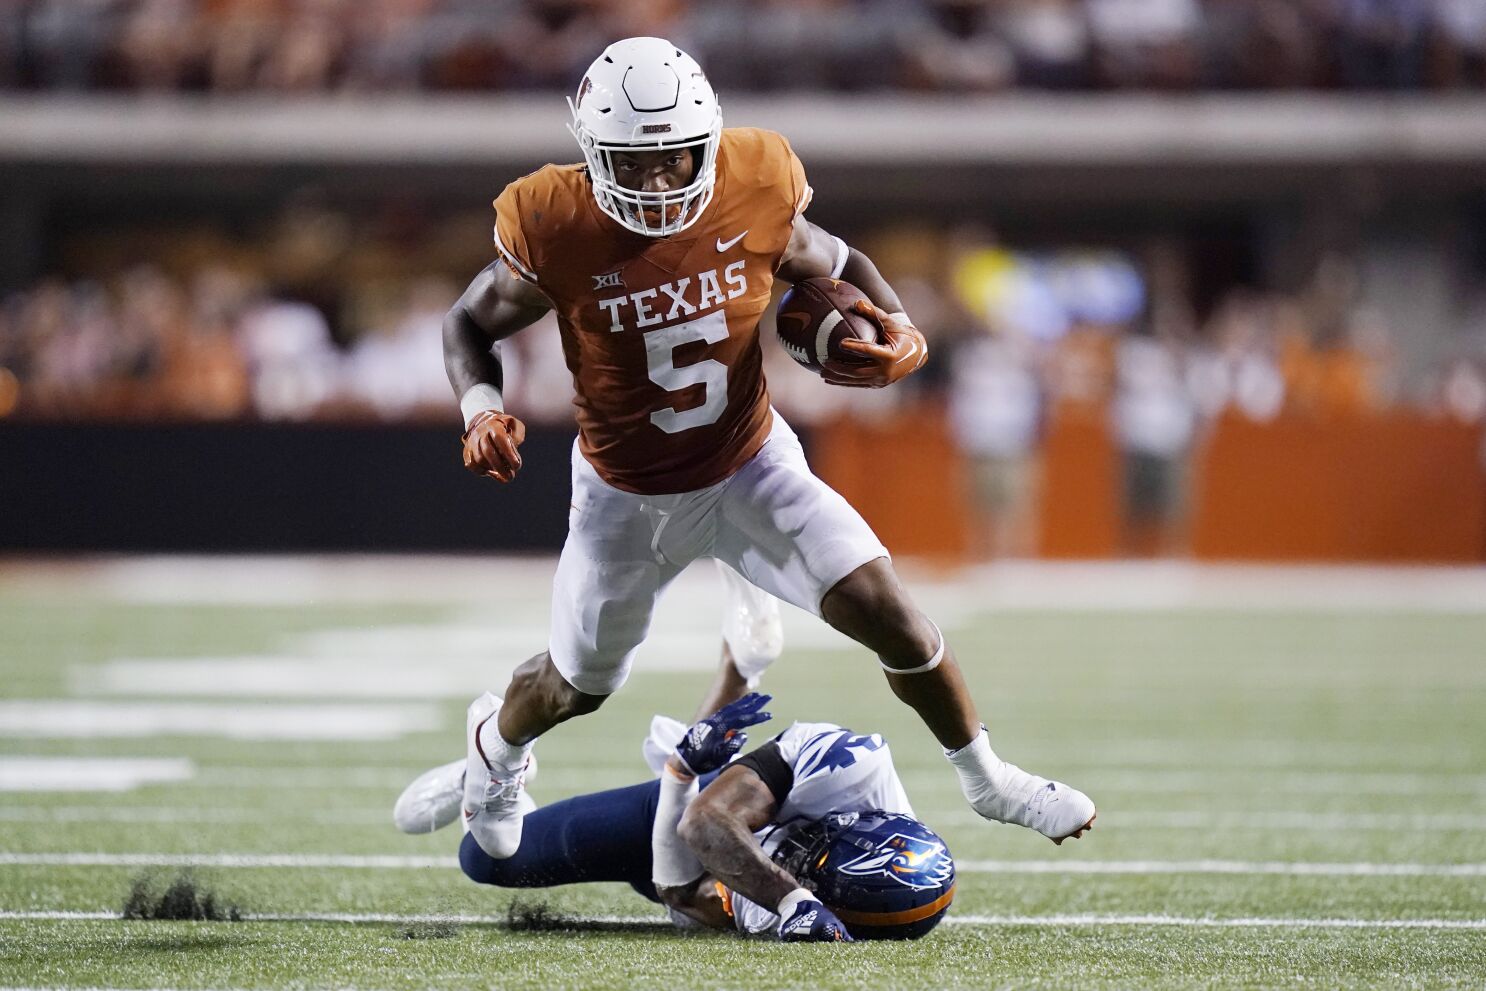 Former Texas star Robinson set to test RB value in NFL draft 